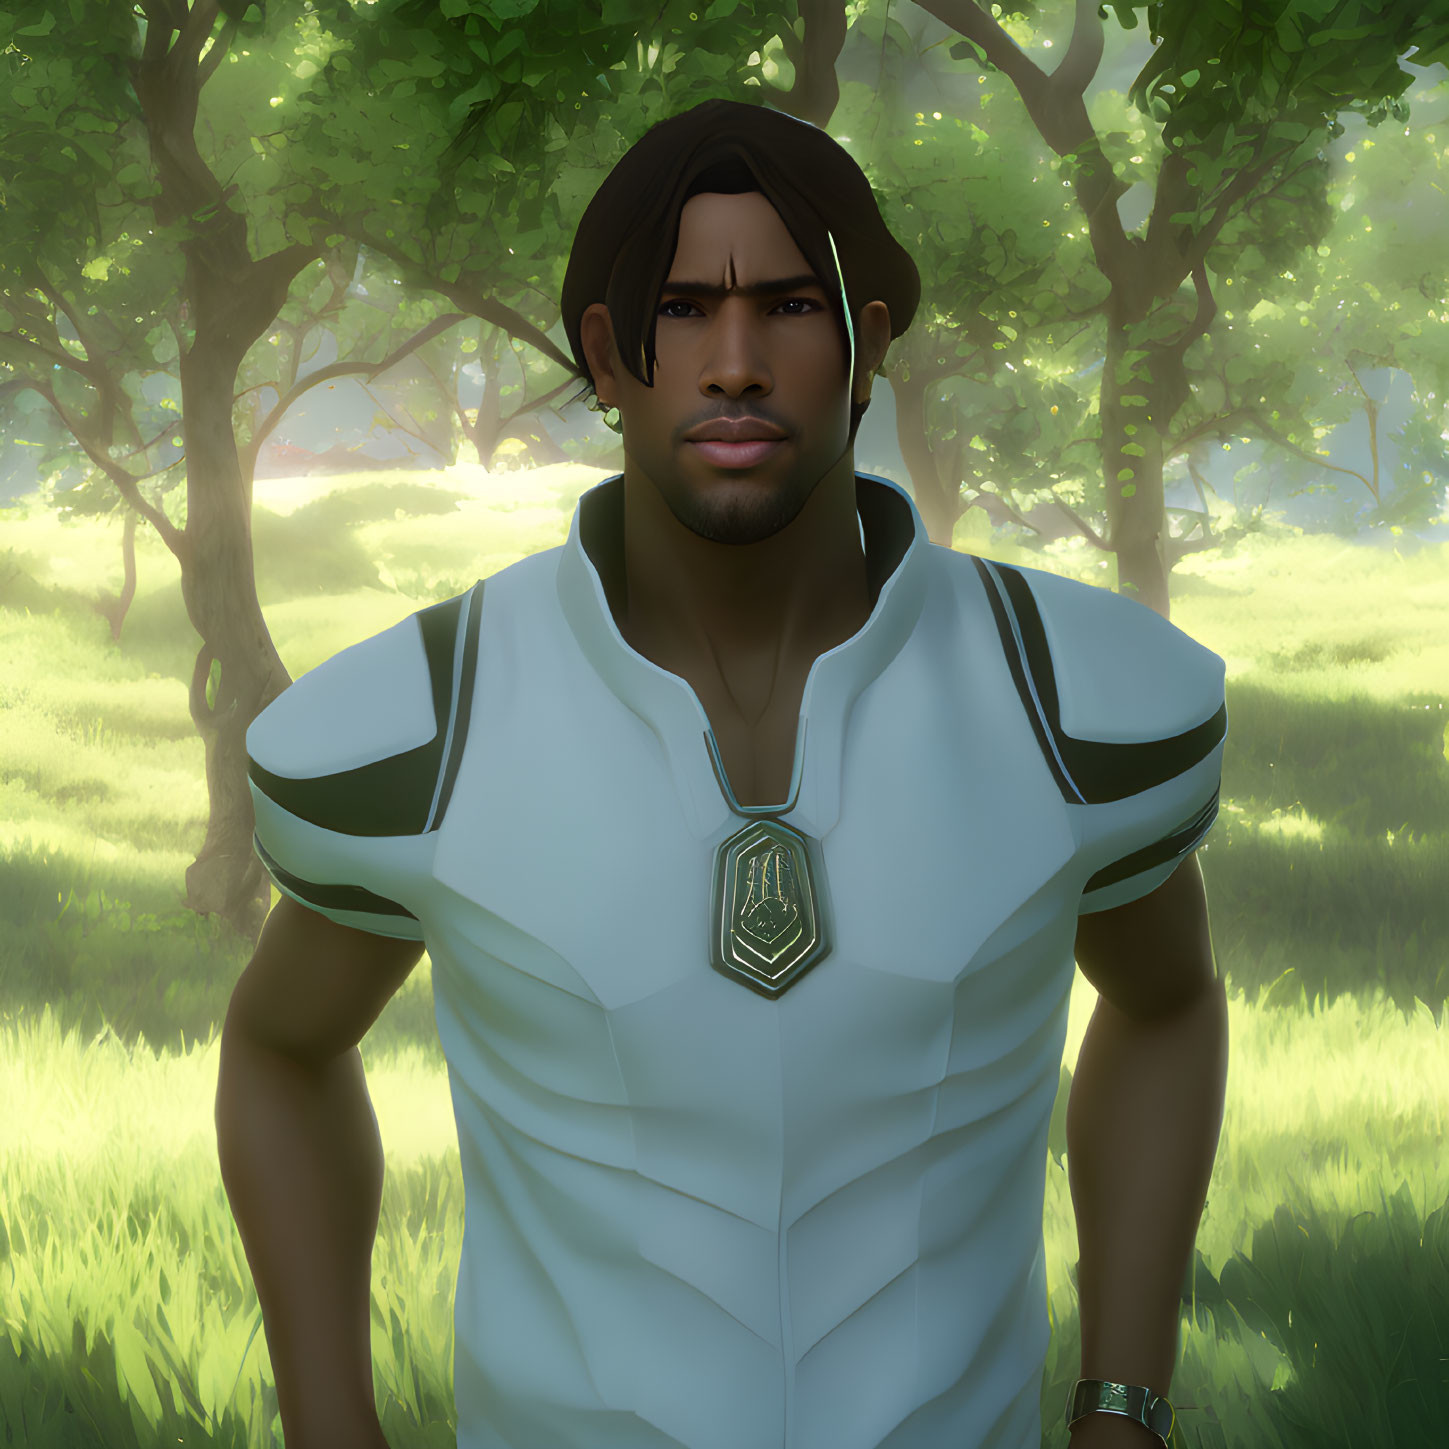 Man with Short Hair and Beard in Futuristic White Vest against Green Forest